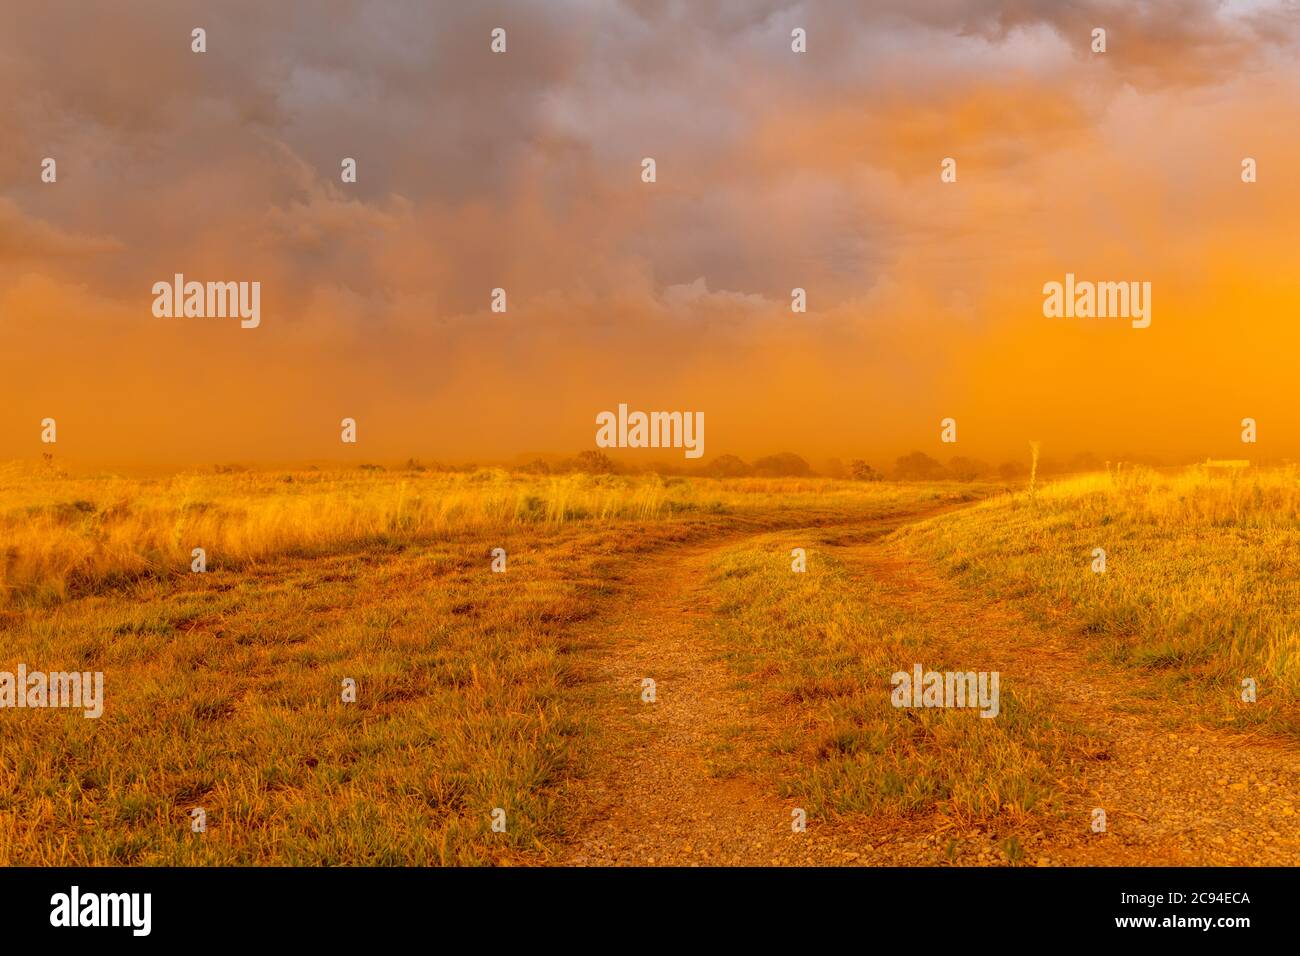 A large dust storm blows across a field at sunset, casting a vibrant deep orange hue across the horizon. Stock Photo